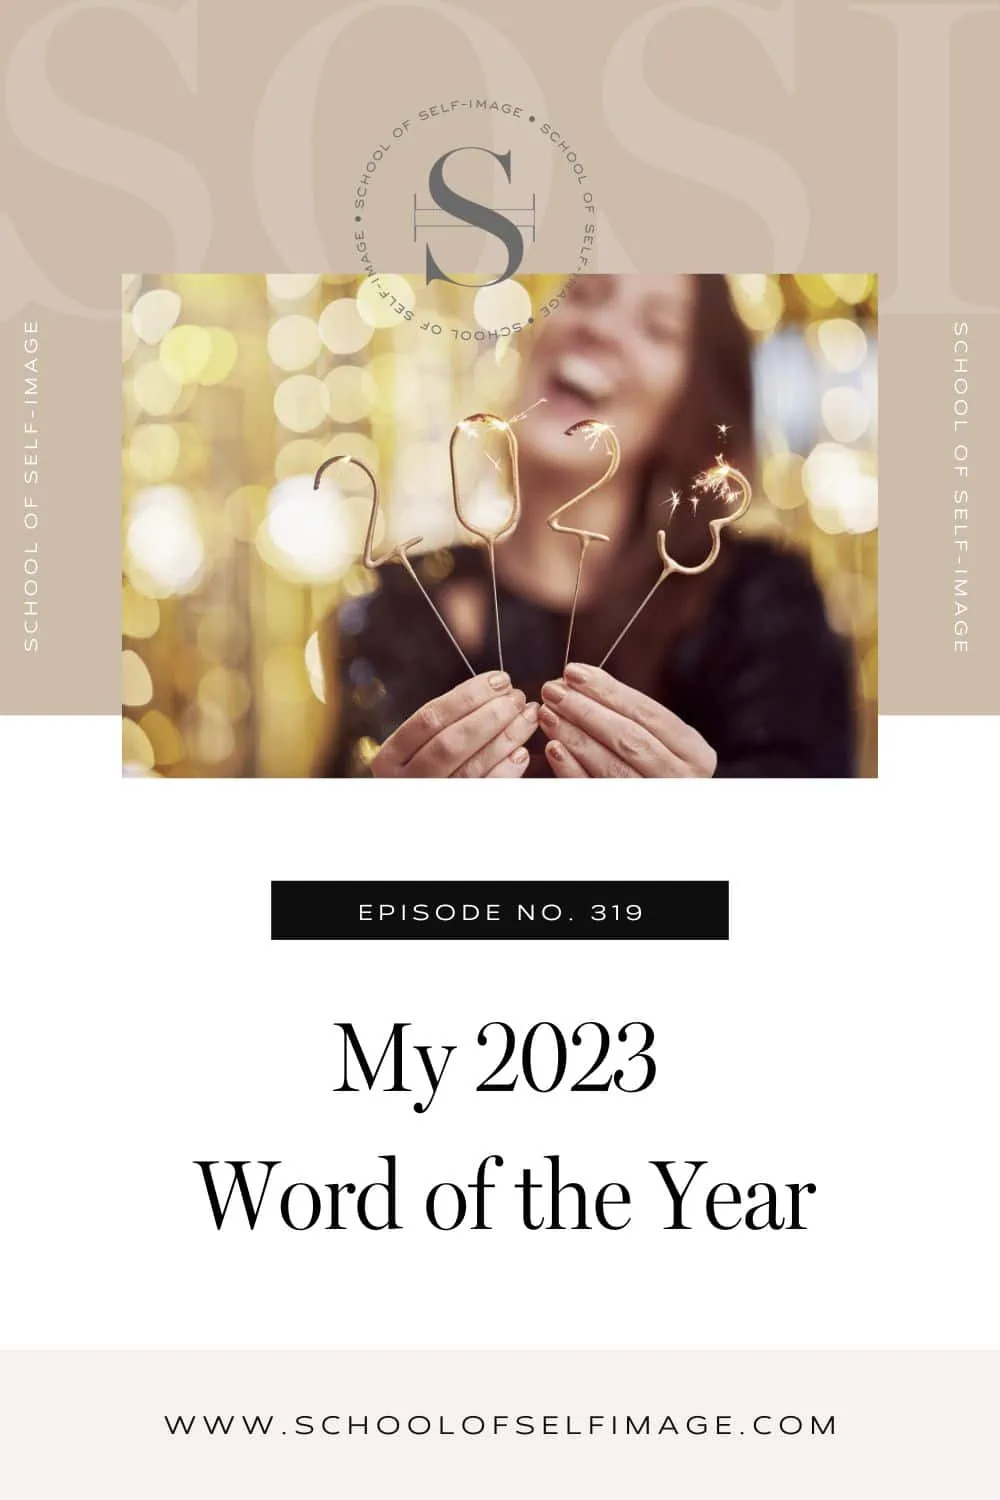 My 2023 Word of the Year